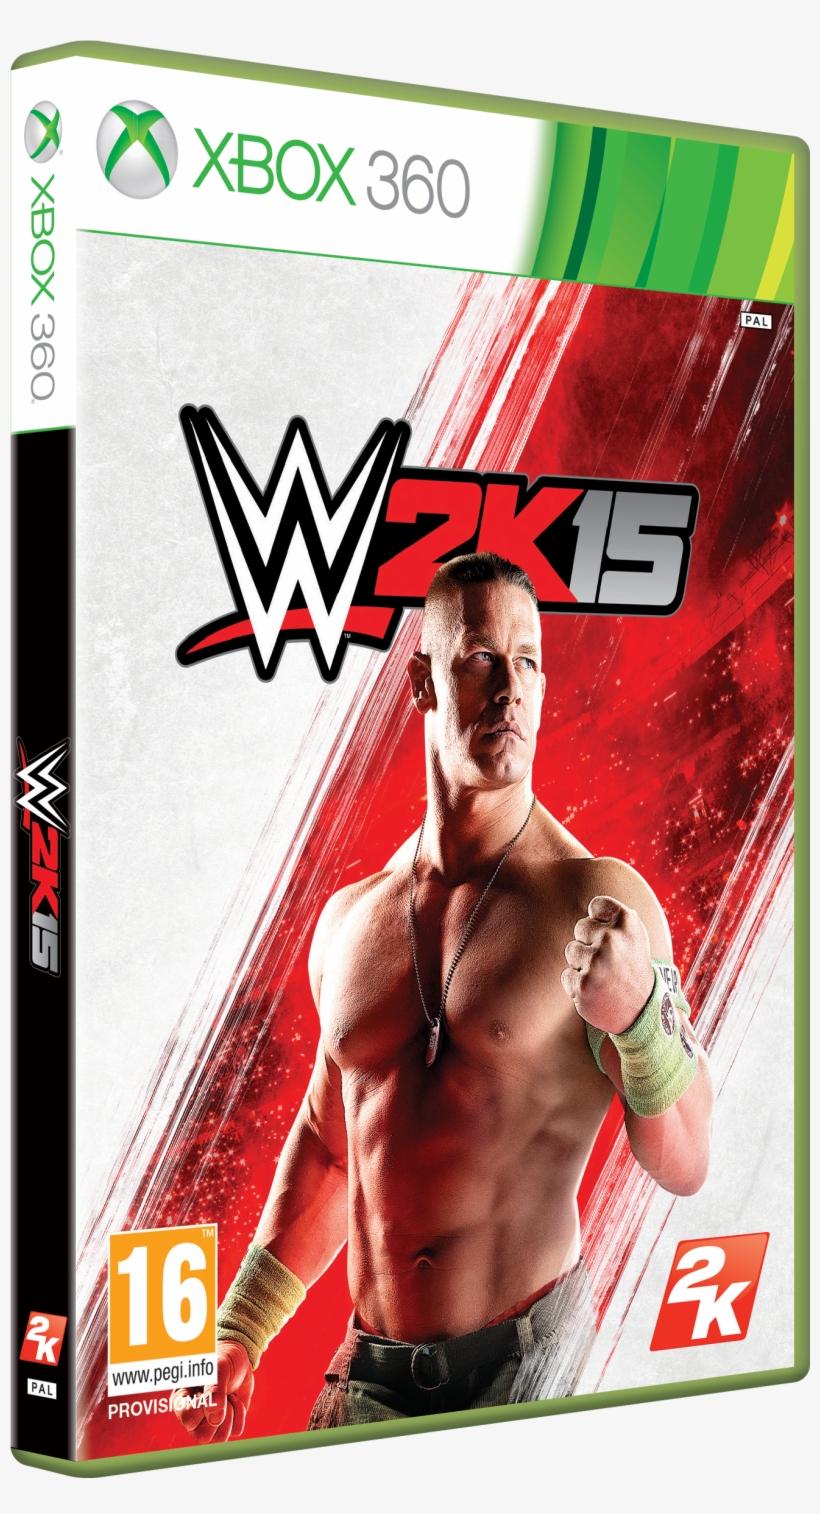 Wwe 2k15 360 3d Spa - Wwe 2k15 Cover Xbox 360, transparent png #6192022